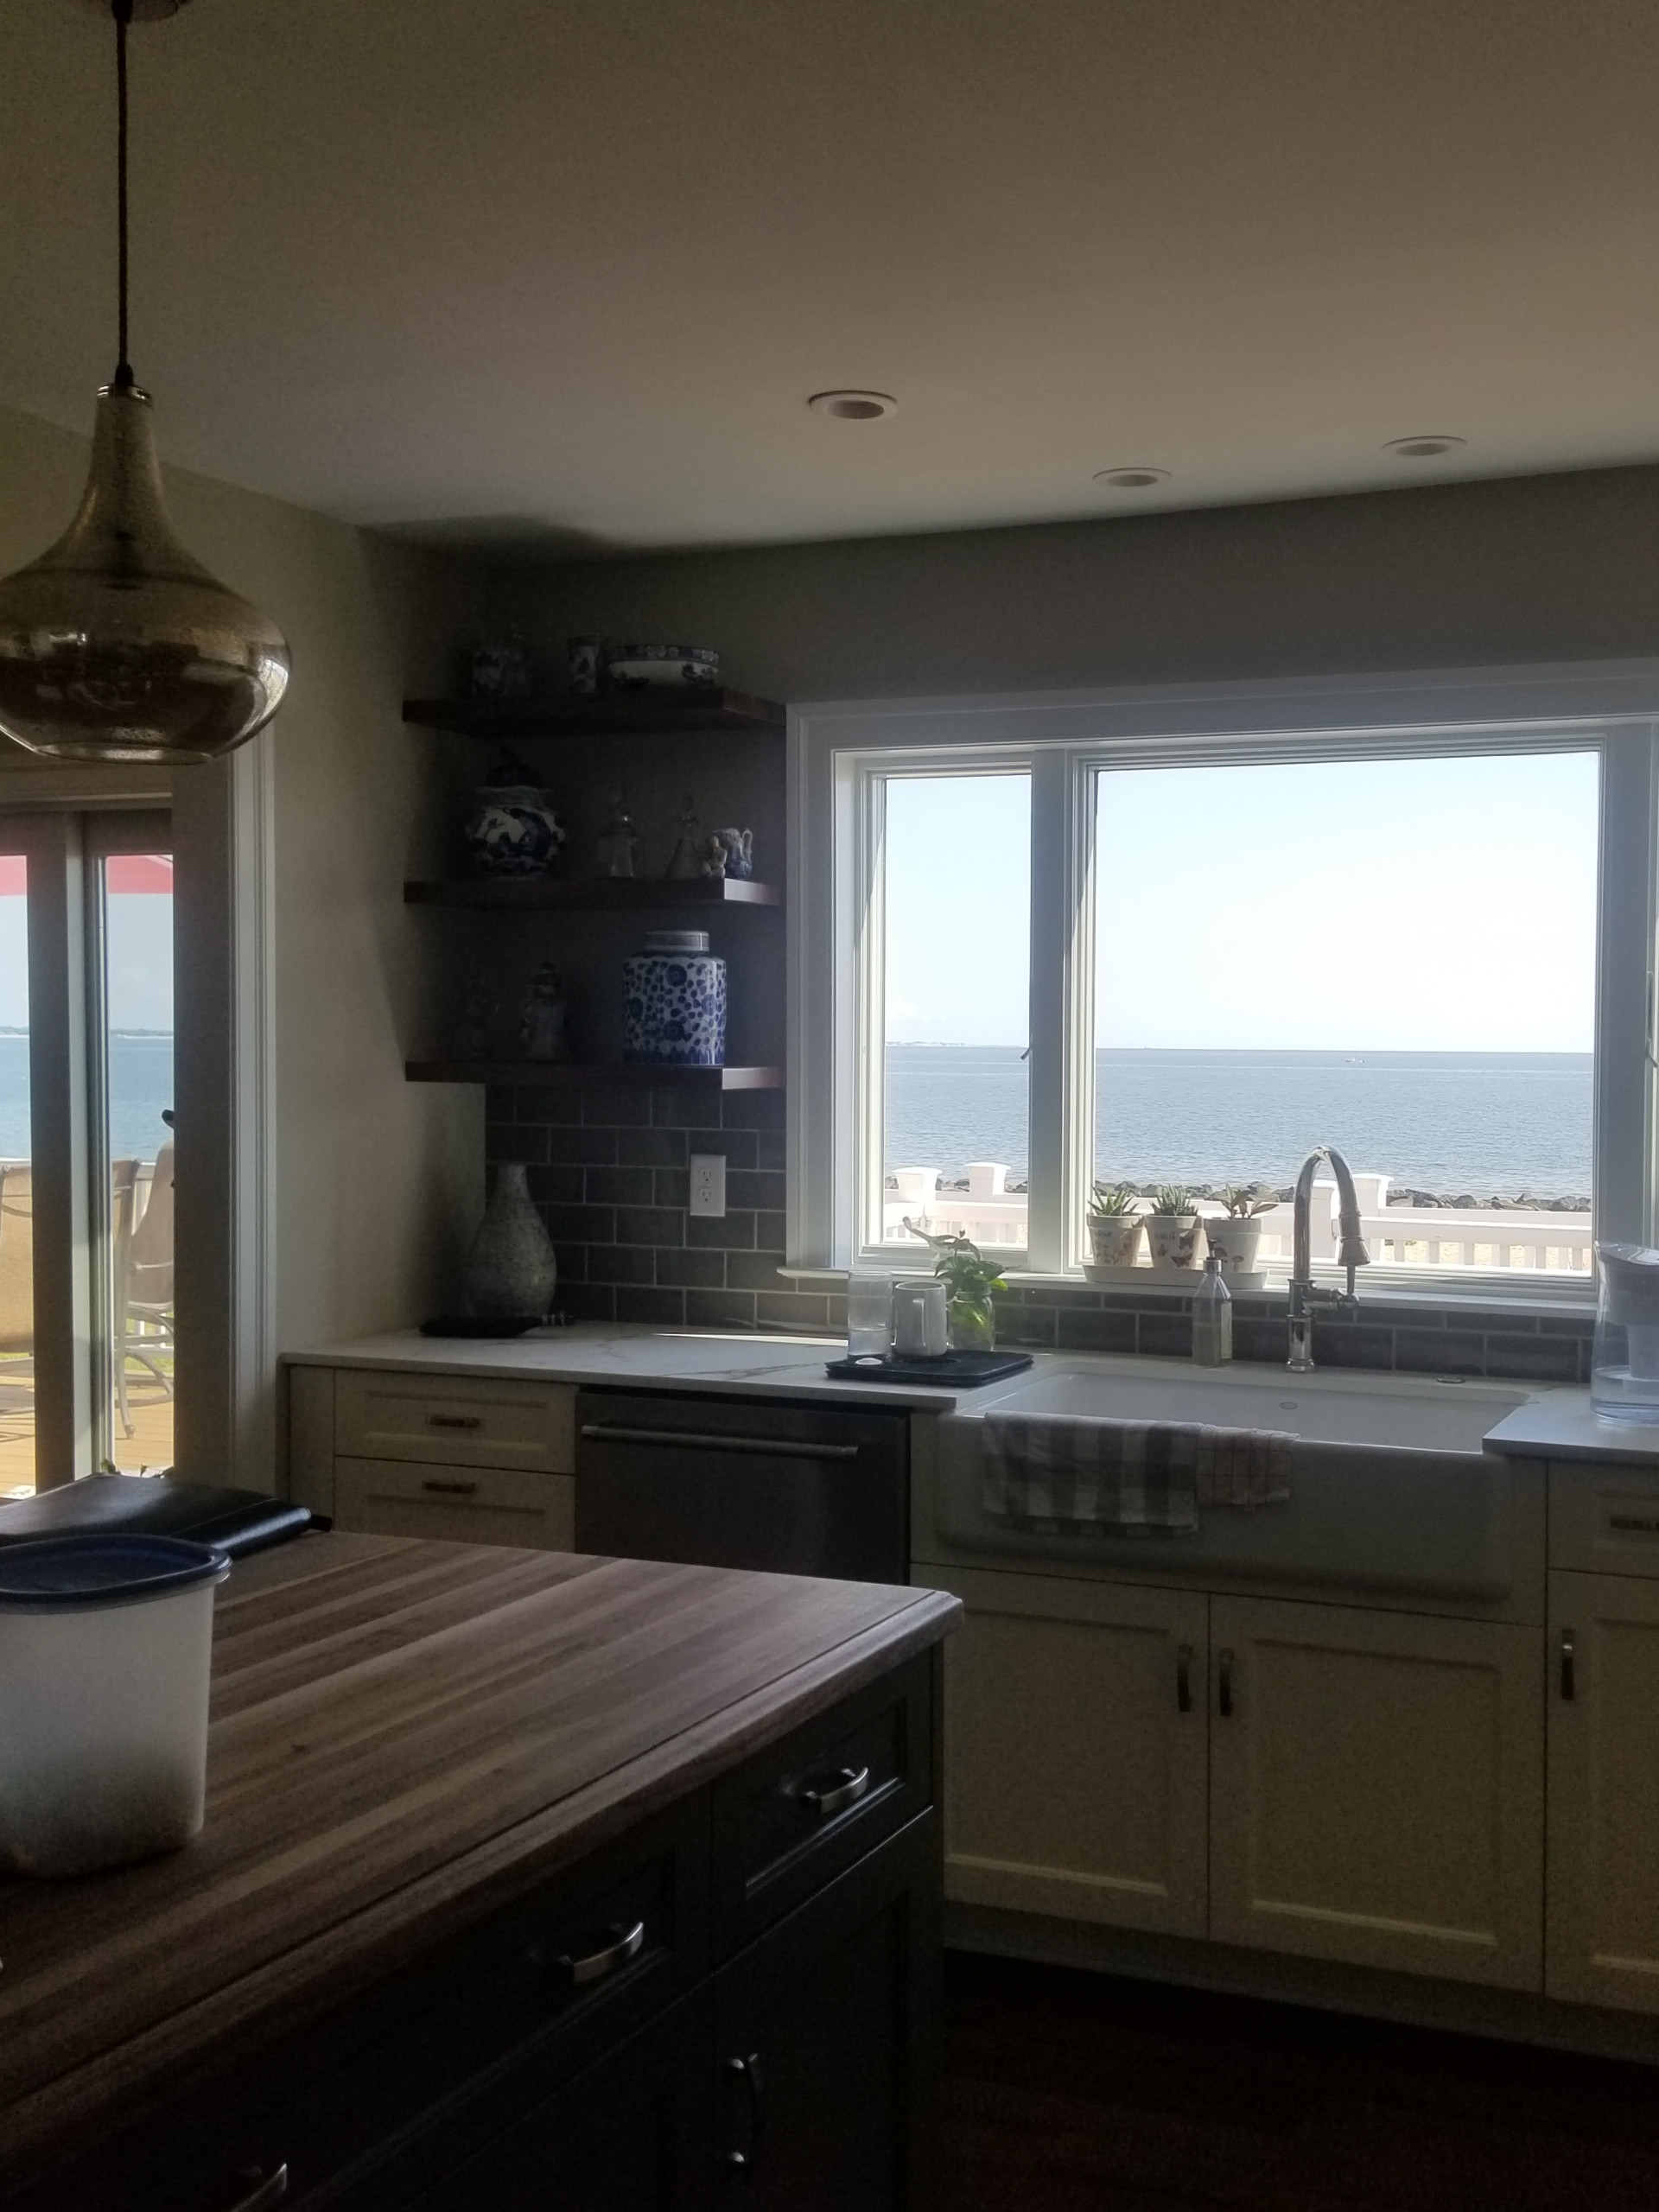 Updated Kitchen with a View